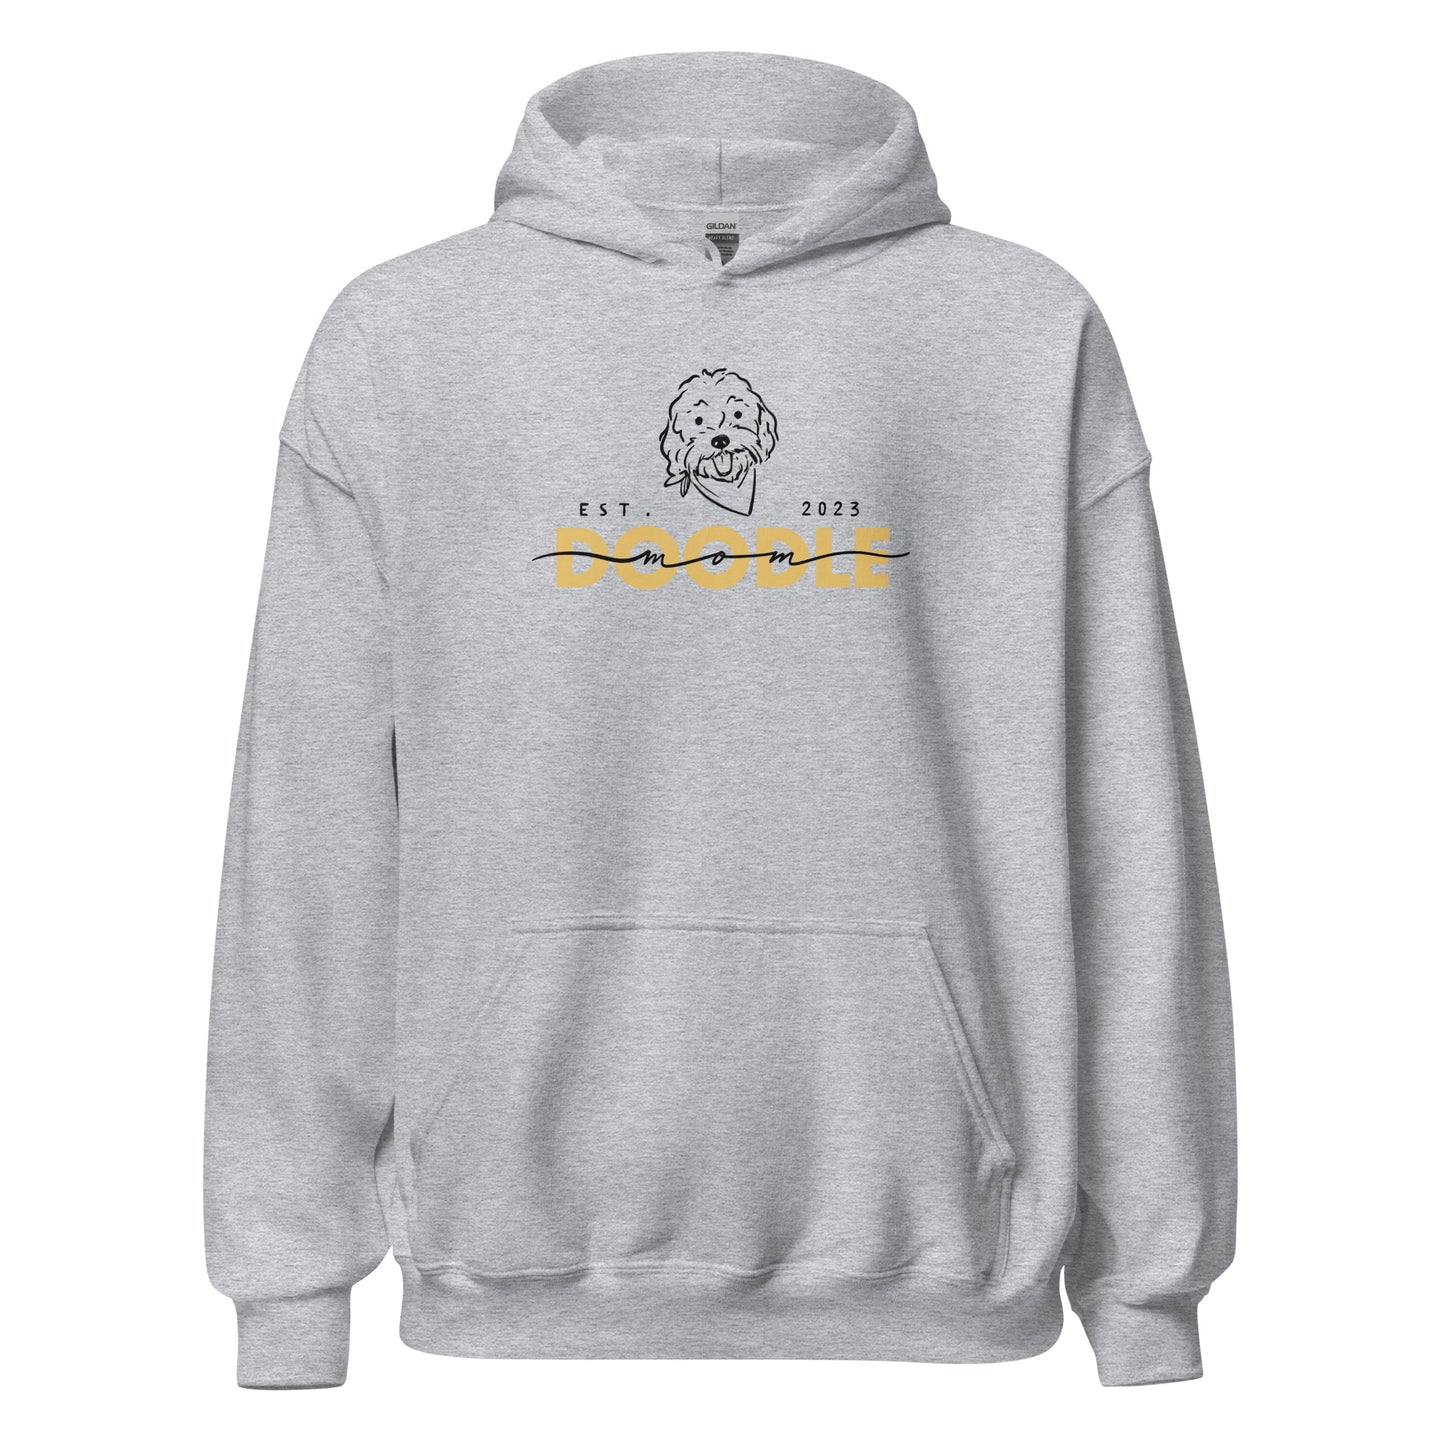 Goldendoodle Mom Hoodie with Goldendoodle face and words "Doodle Mom Est 2023" in Sport gray color